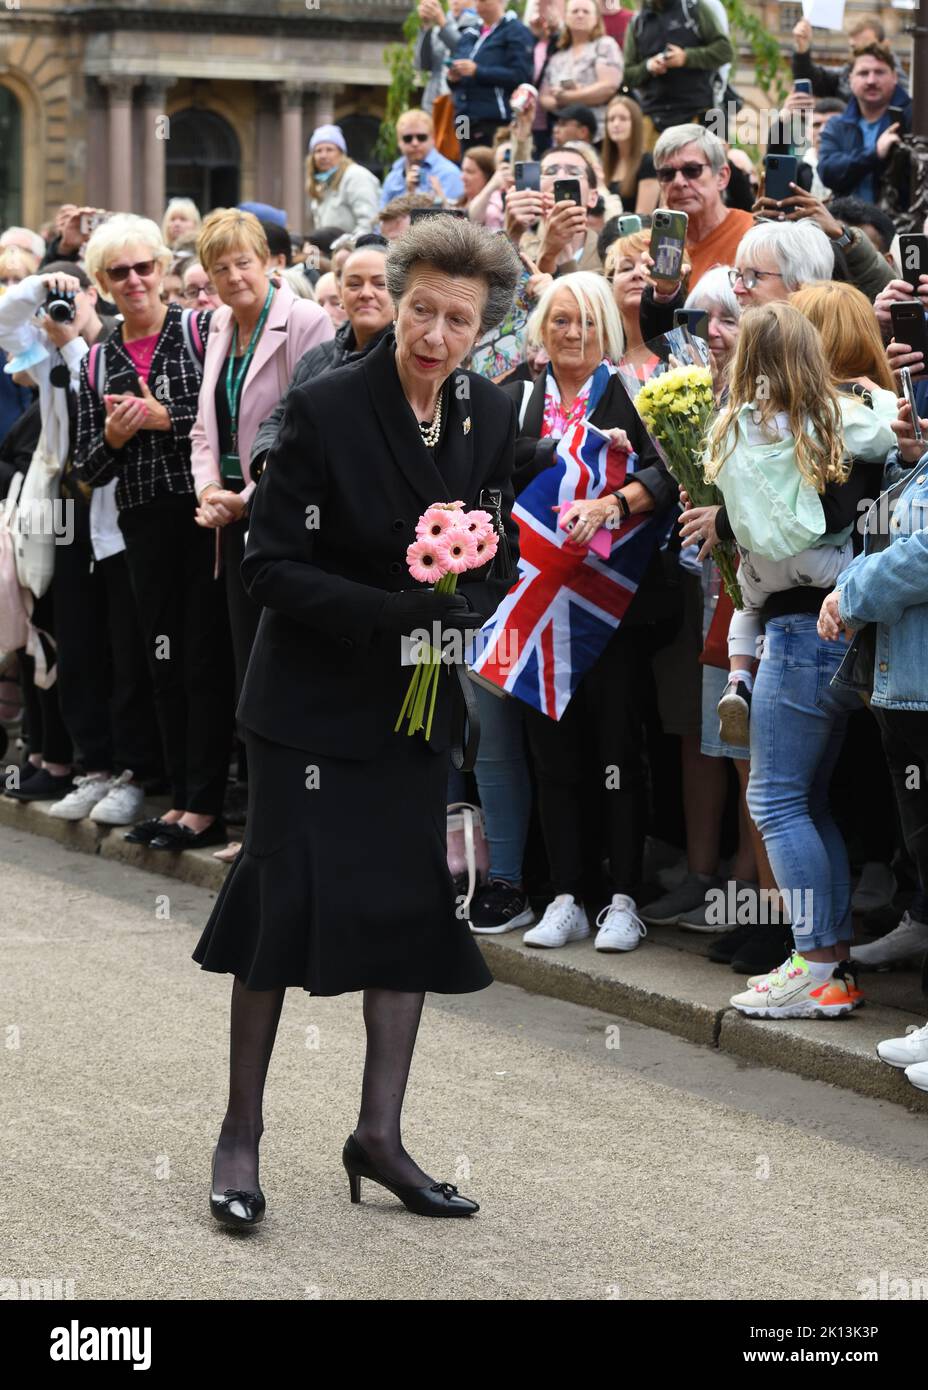 Glasgow, Scotland, UK. 15th Sep, 2022. Glasgow Scotland, UK. The Princess Royal, Princess Anne visits Glasgow and meets the people before entering the city chambers to meet the Lord Provost, and invited guests of organisations for whom Queen Elizabeth was patron. Credit. Credit: Douglas Carr/Alamy Live News Stock Photo